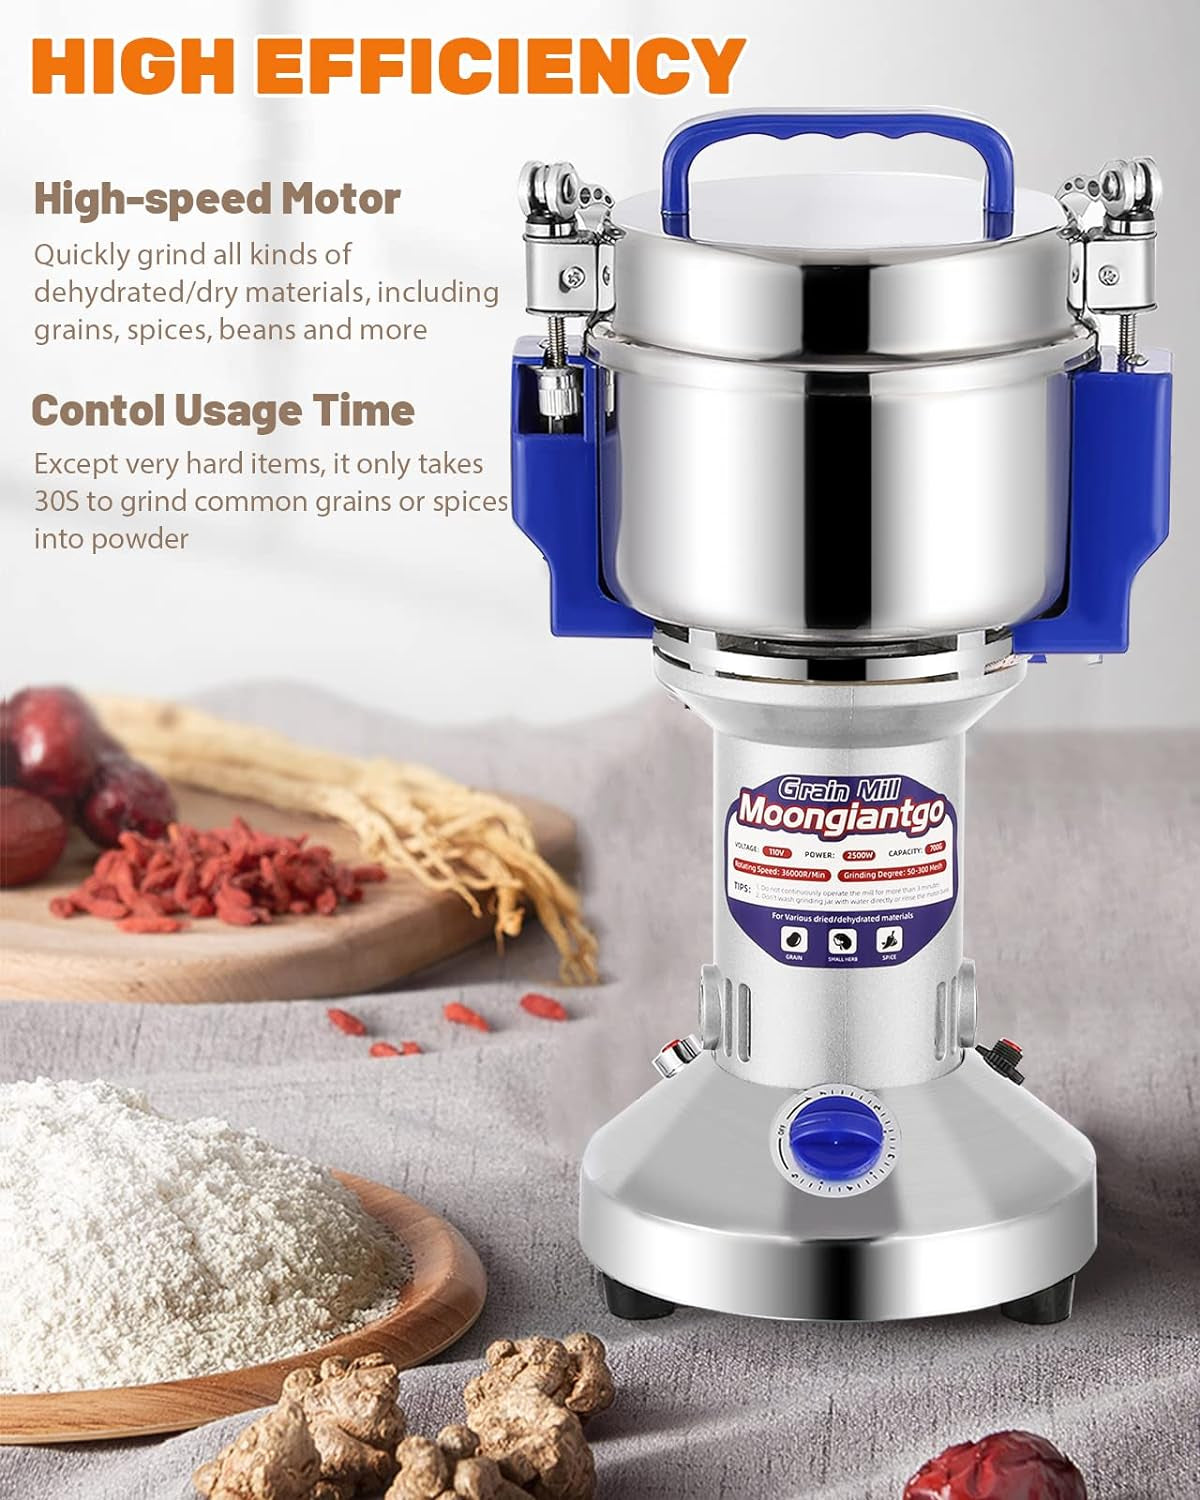 "High-Speed Electric Grain Mill and Spice Grinder - Stainless Steel, 500G Capacity"